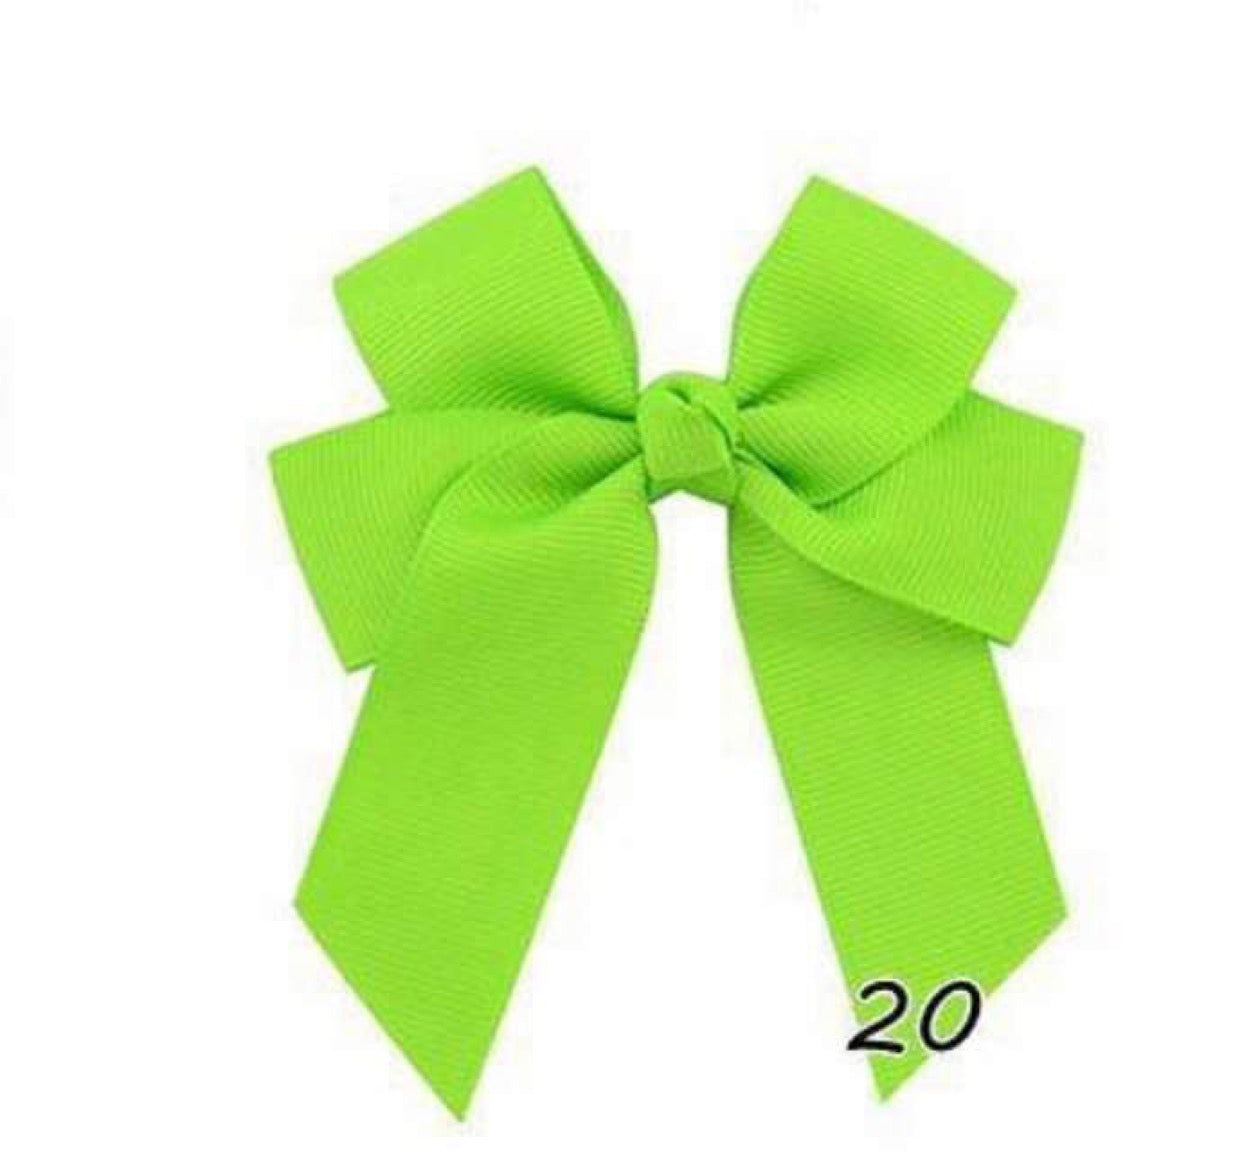 Sublimation 4 inch hair bows